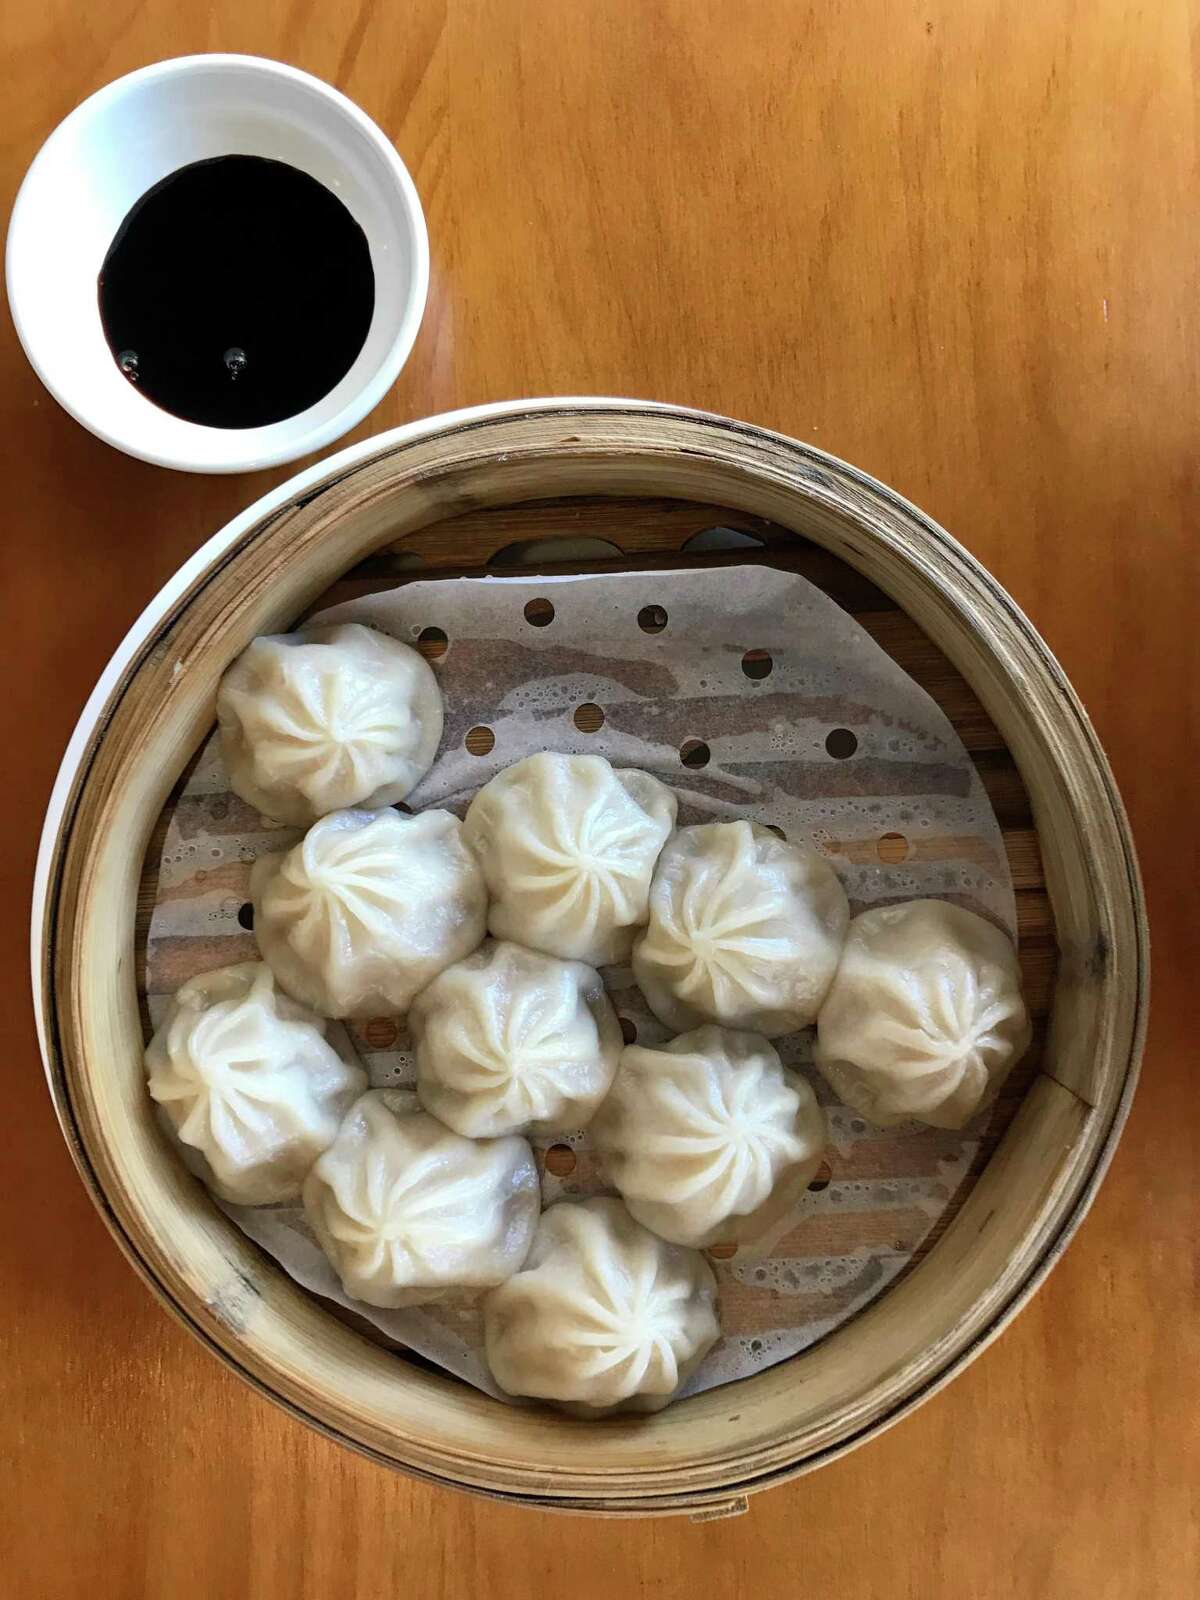 These soup dumplings are filled with chicken or pork at Tiger’s Chinese Cuisine.